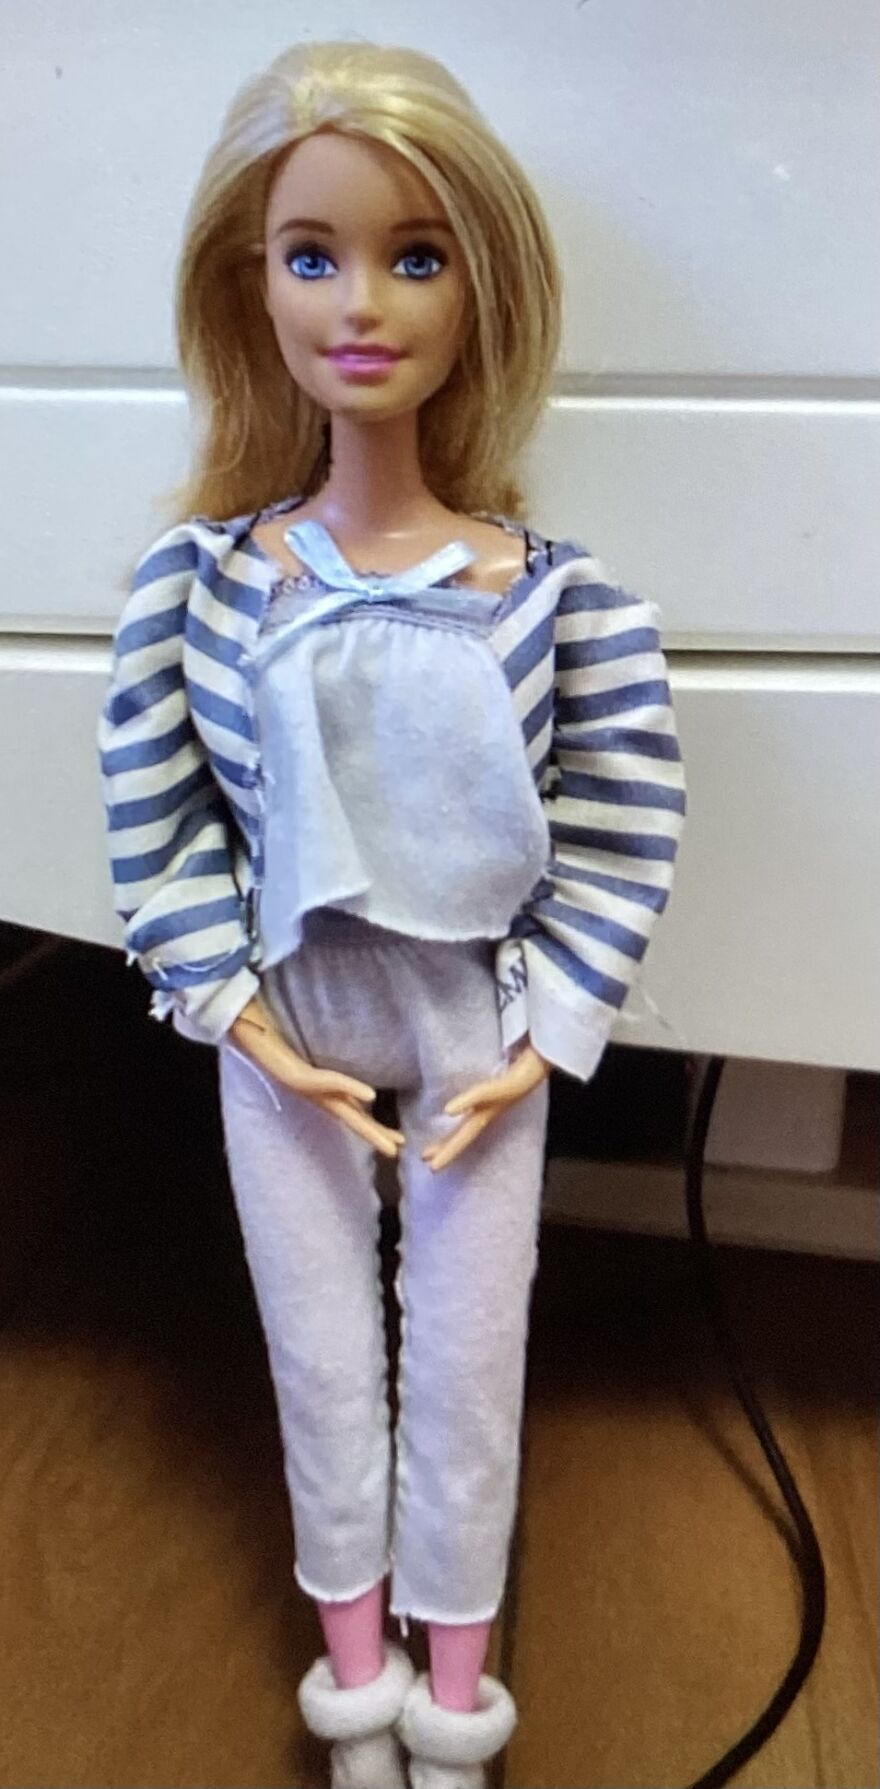 I Make Outfits Out Of Old Clothes For Dolls (Part 3)